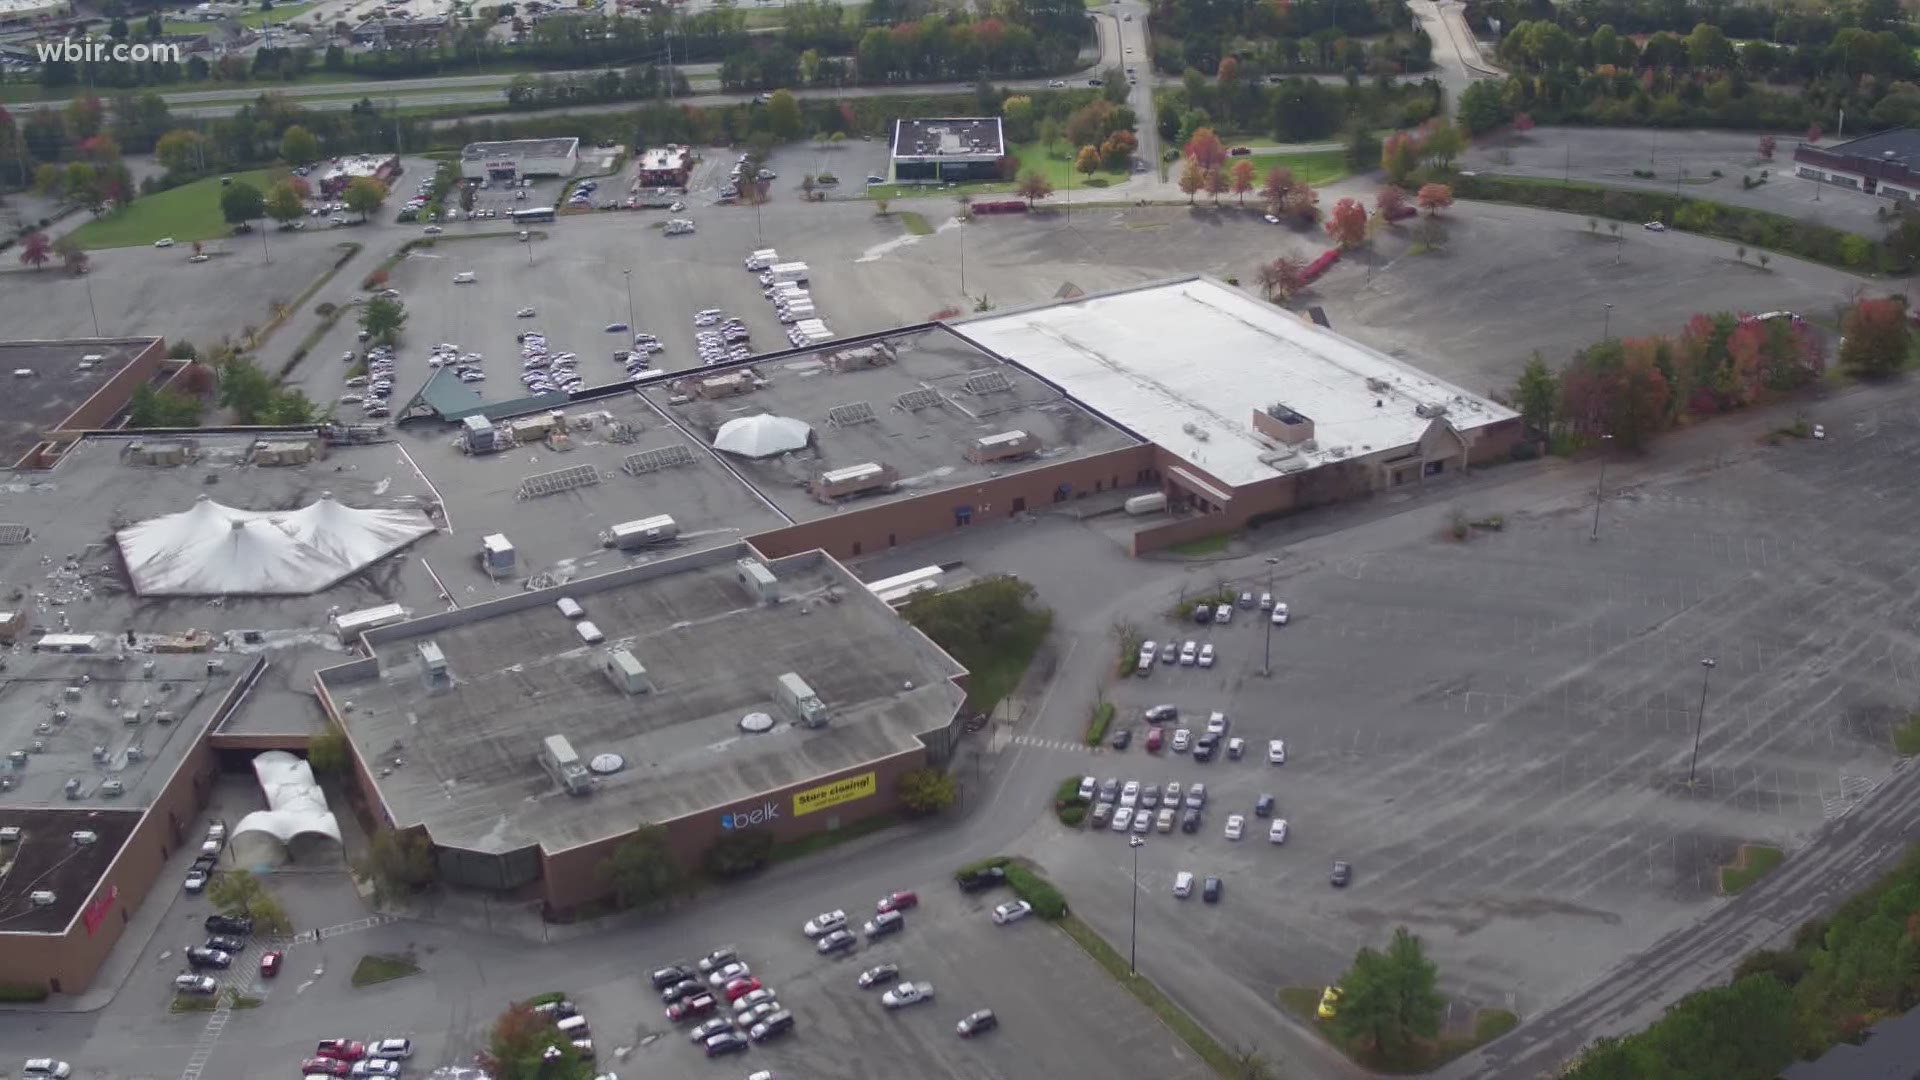 The Knoxville City Council will be meeting to consider the proposal to transform a former mall into a fulfillment center.